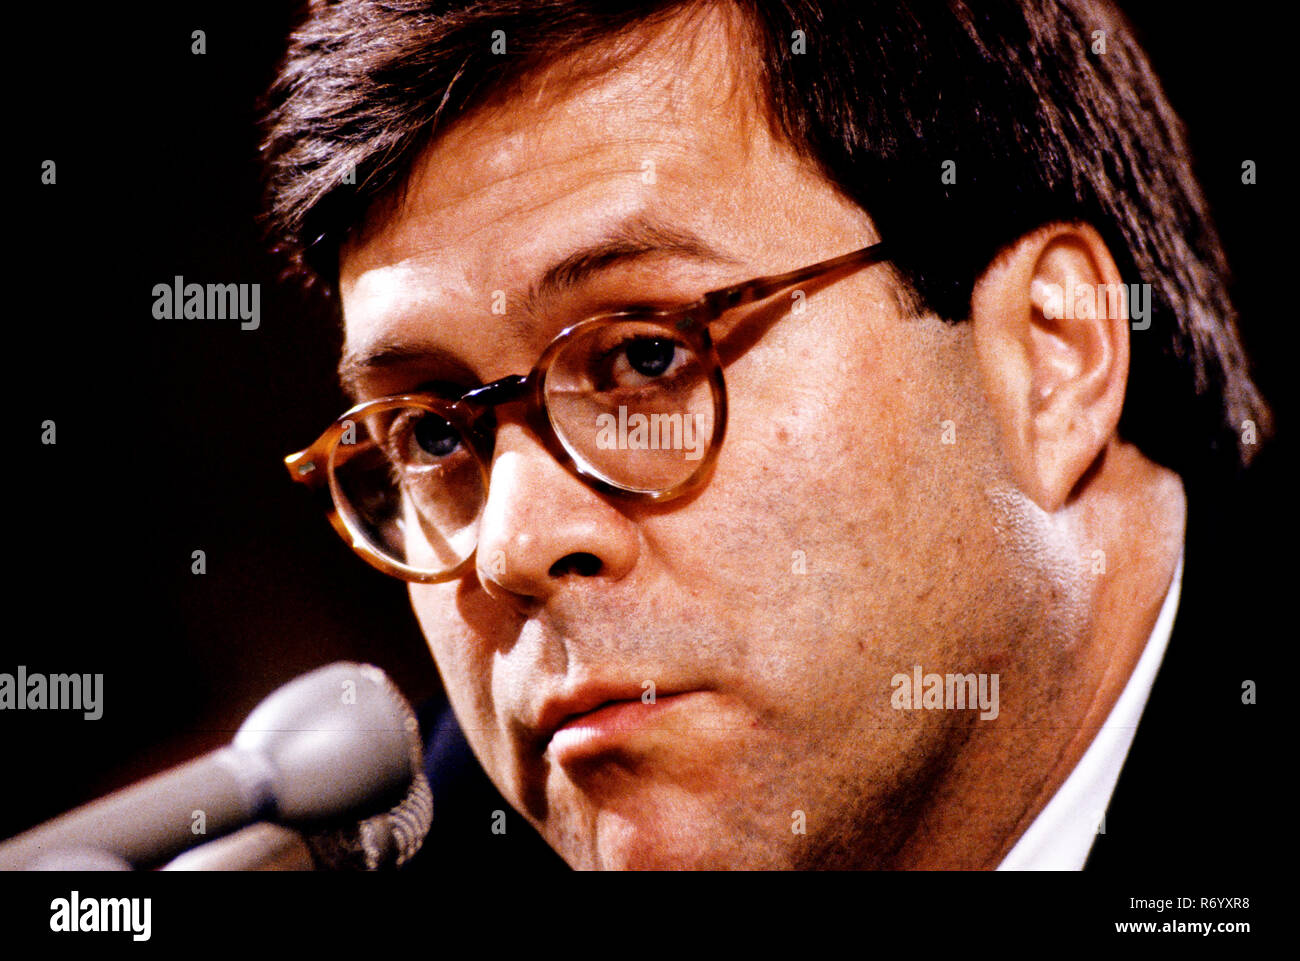 William P. Barr, who was was appointed by United States President George H.W. Bush to be the 77th US Attorney General, testifies before the US Senate Committee on the Judiciary on Capitol Hill in Washington, DC on November 12, 1991. Credit: Ron Sachs / CNP / MediaPunch Stock Photo